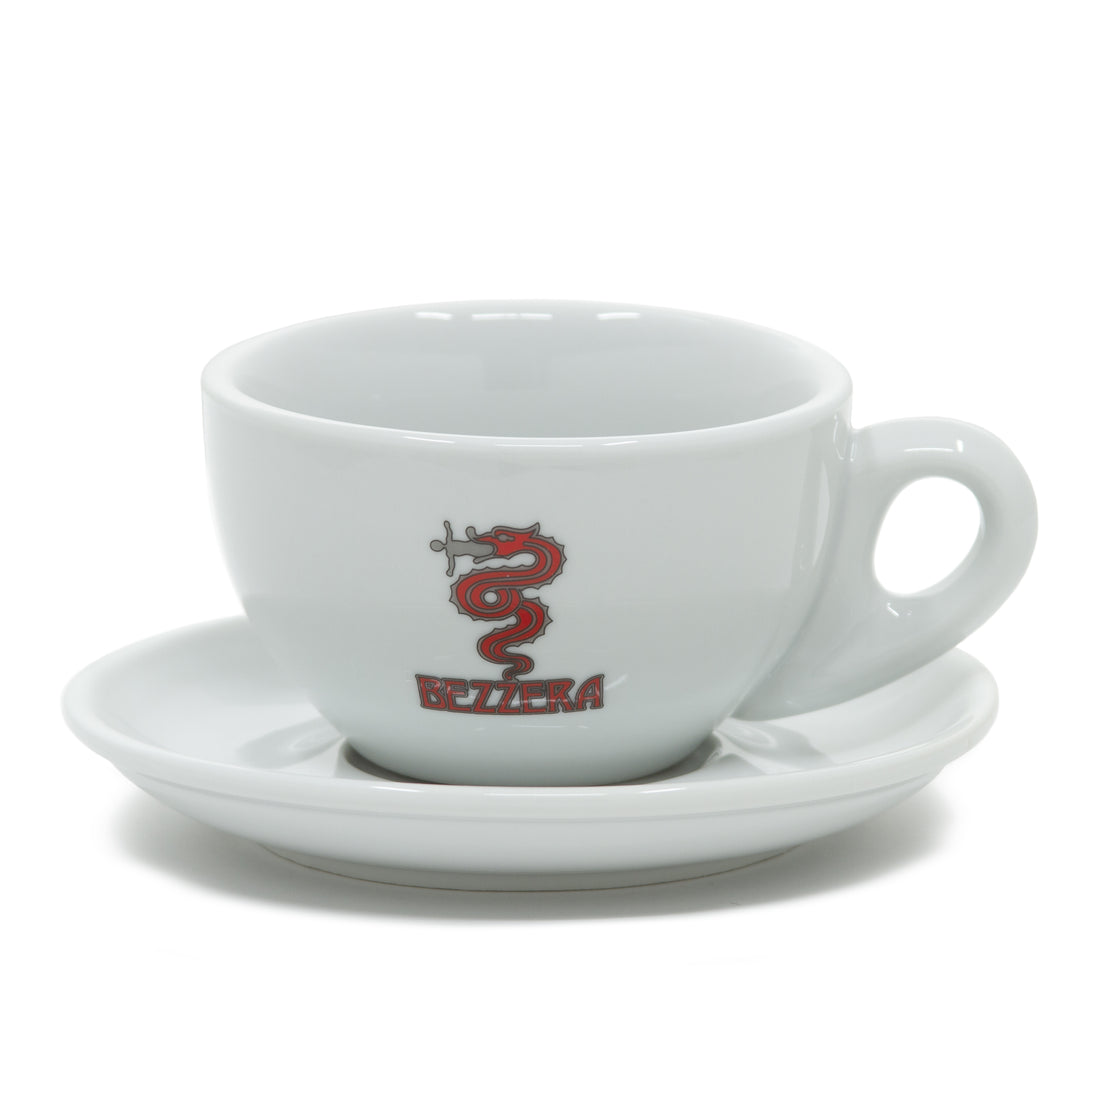 Bezzera Large Cappuccino Cup and Saucer Set